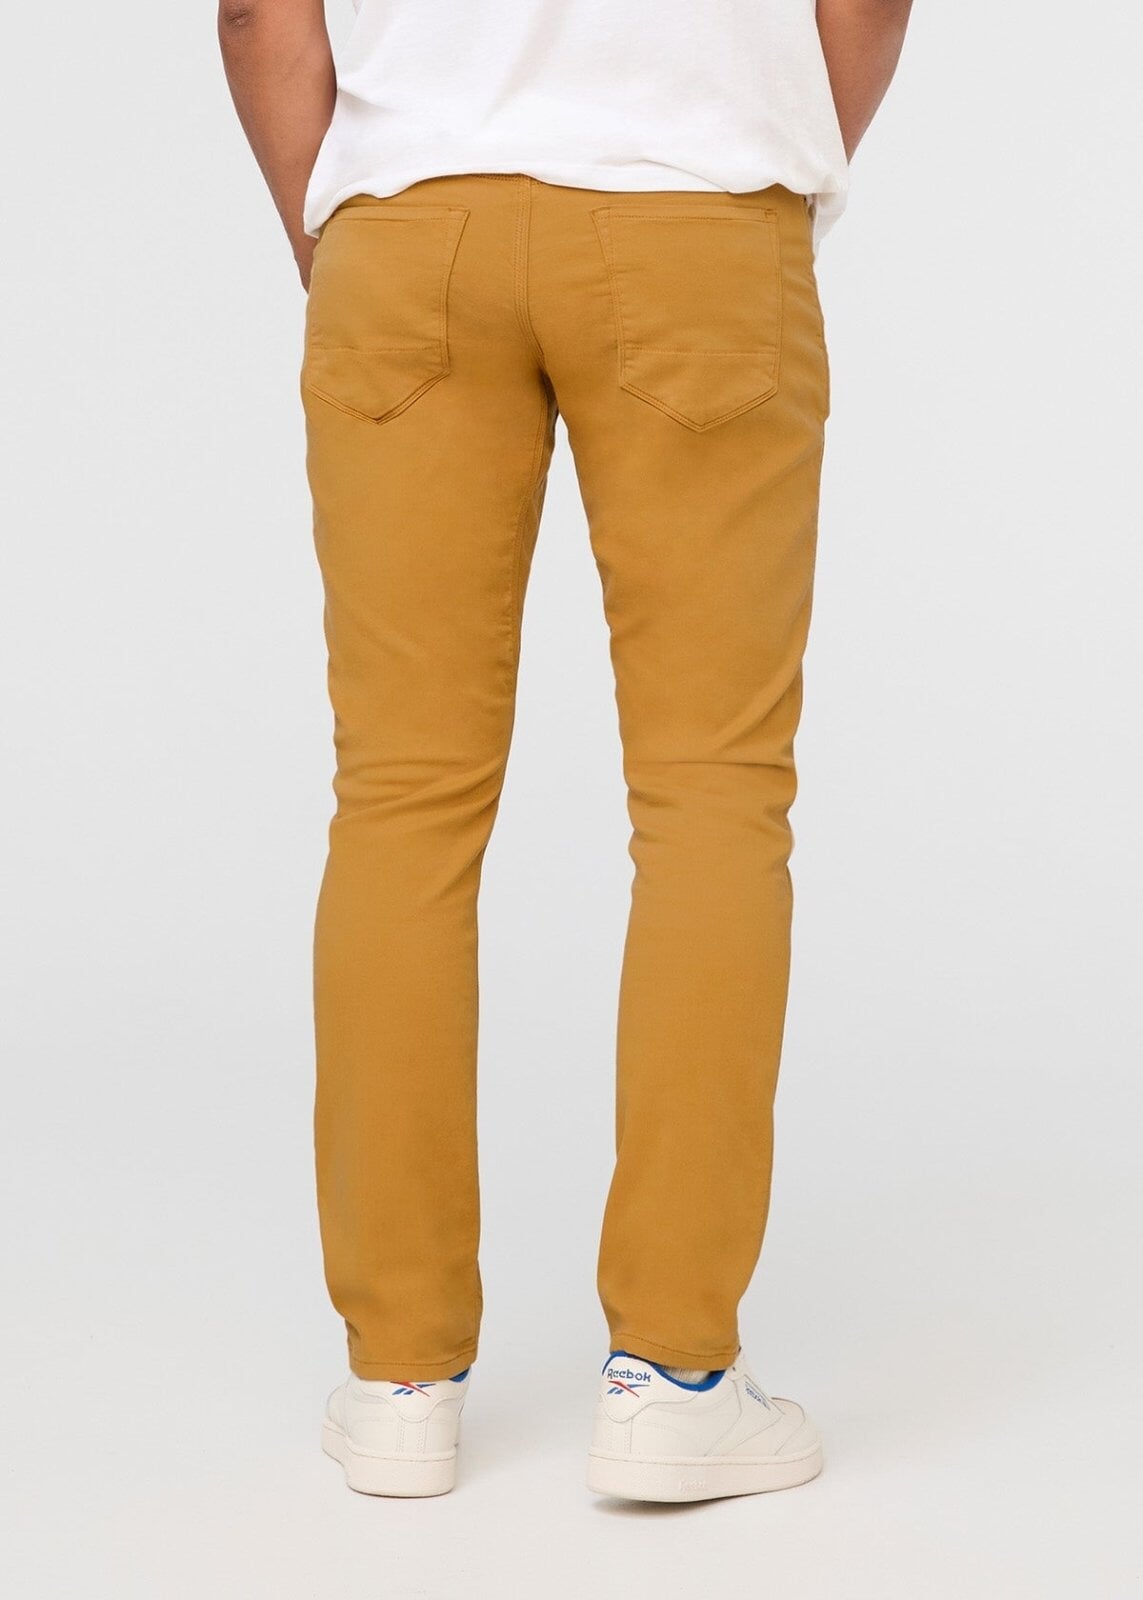 Yellow Pants for Men for Sale - eBay